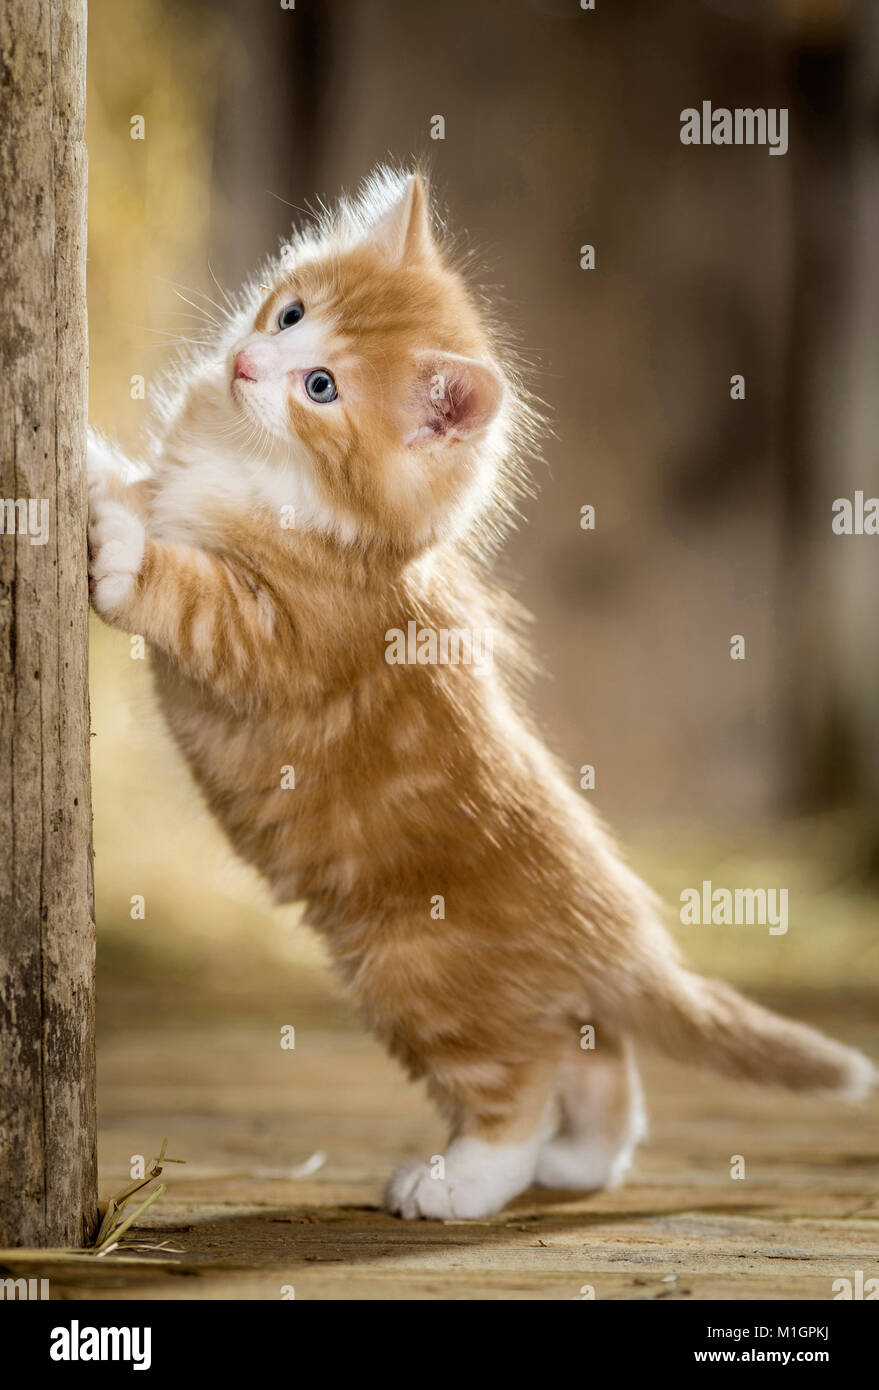 Norwegian Forest Cat. Kitten in a barn, standing upright at a wooden beam. Germany Stock Photo